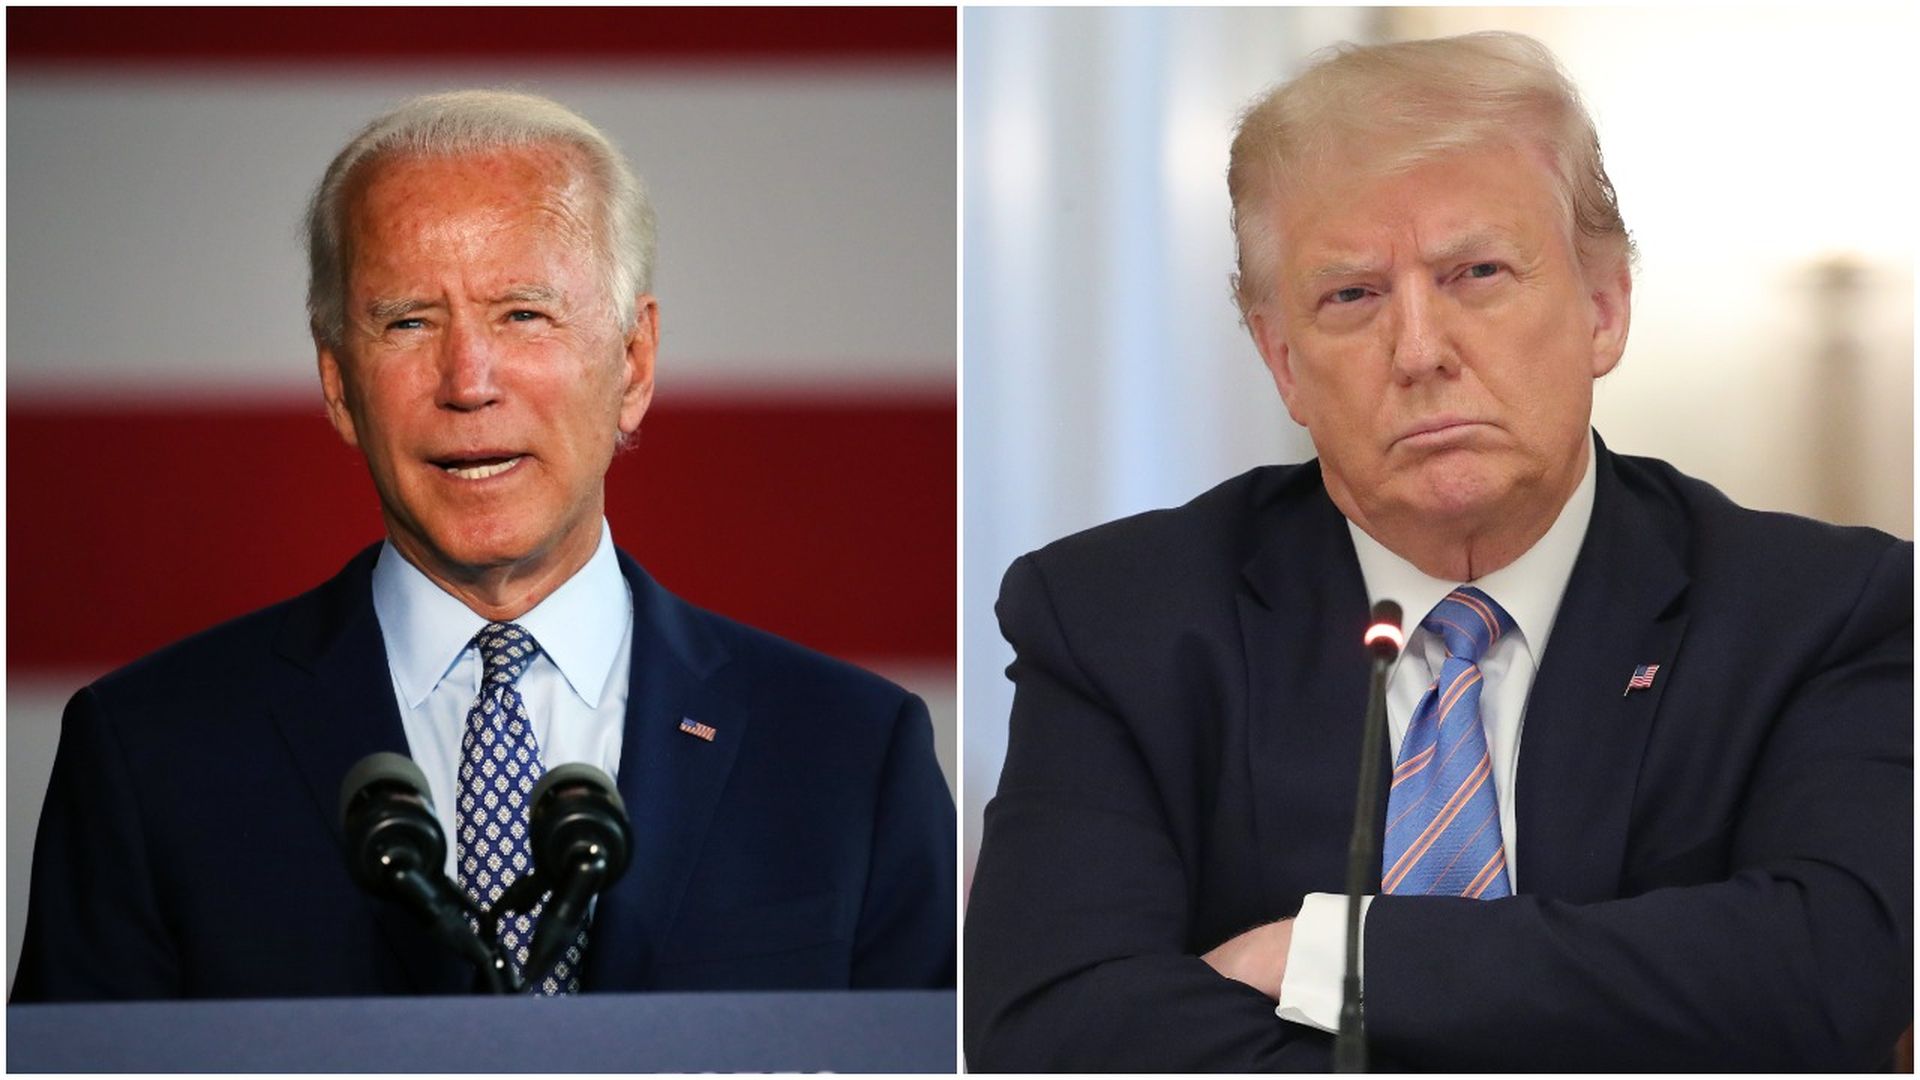 Joe Biden speaking at a podium as another photo shows President Trump with his arms crossed